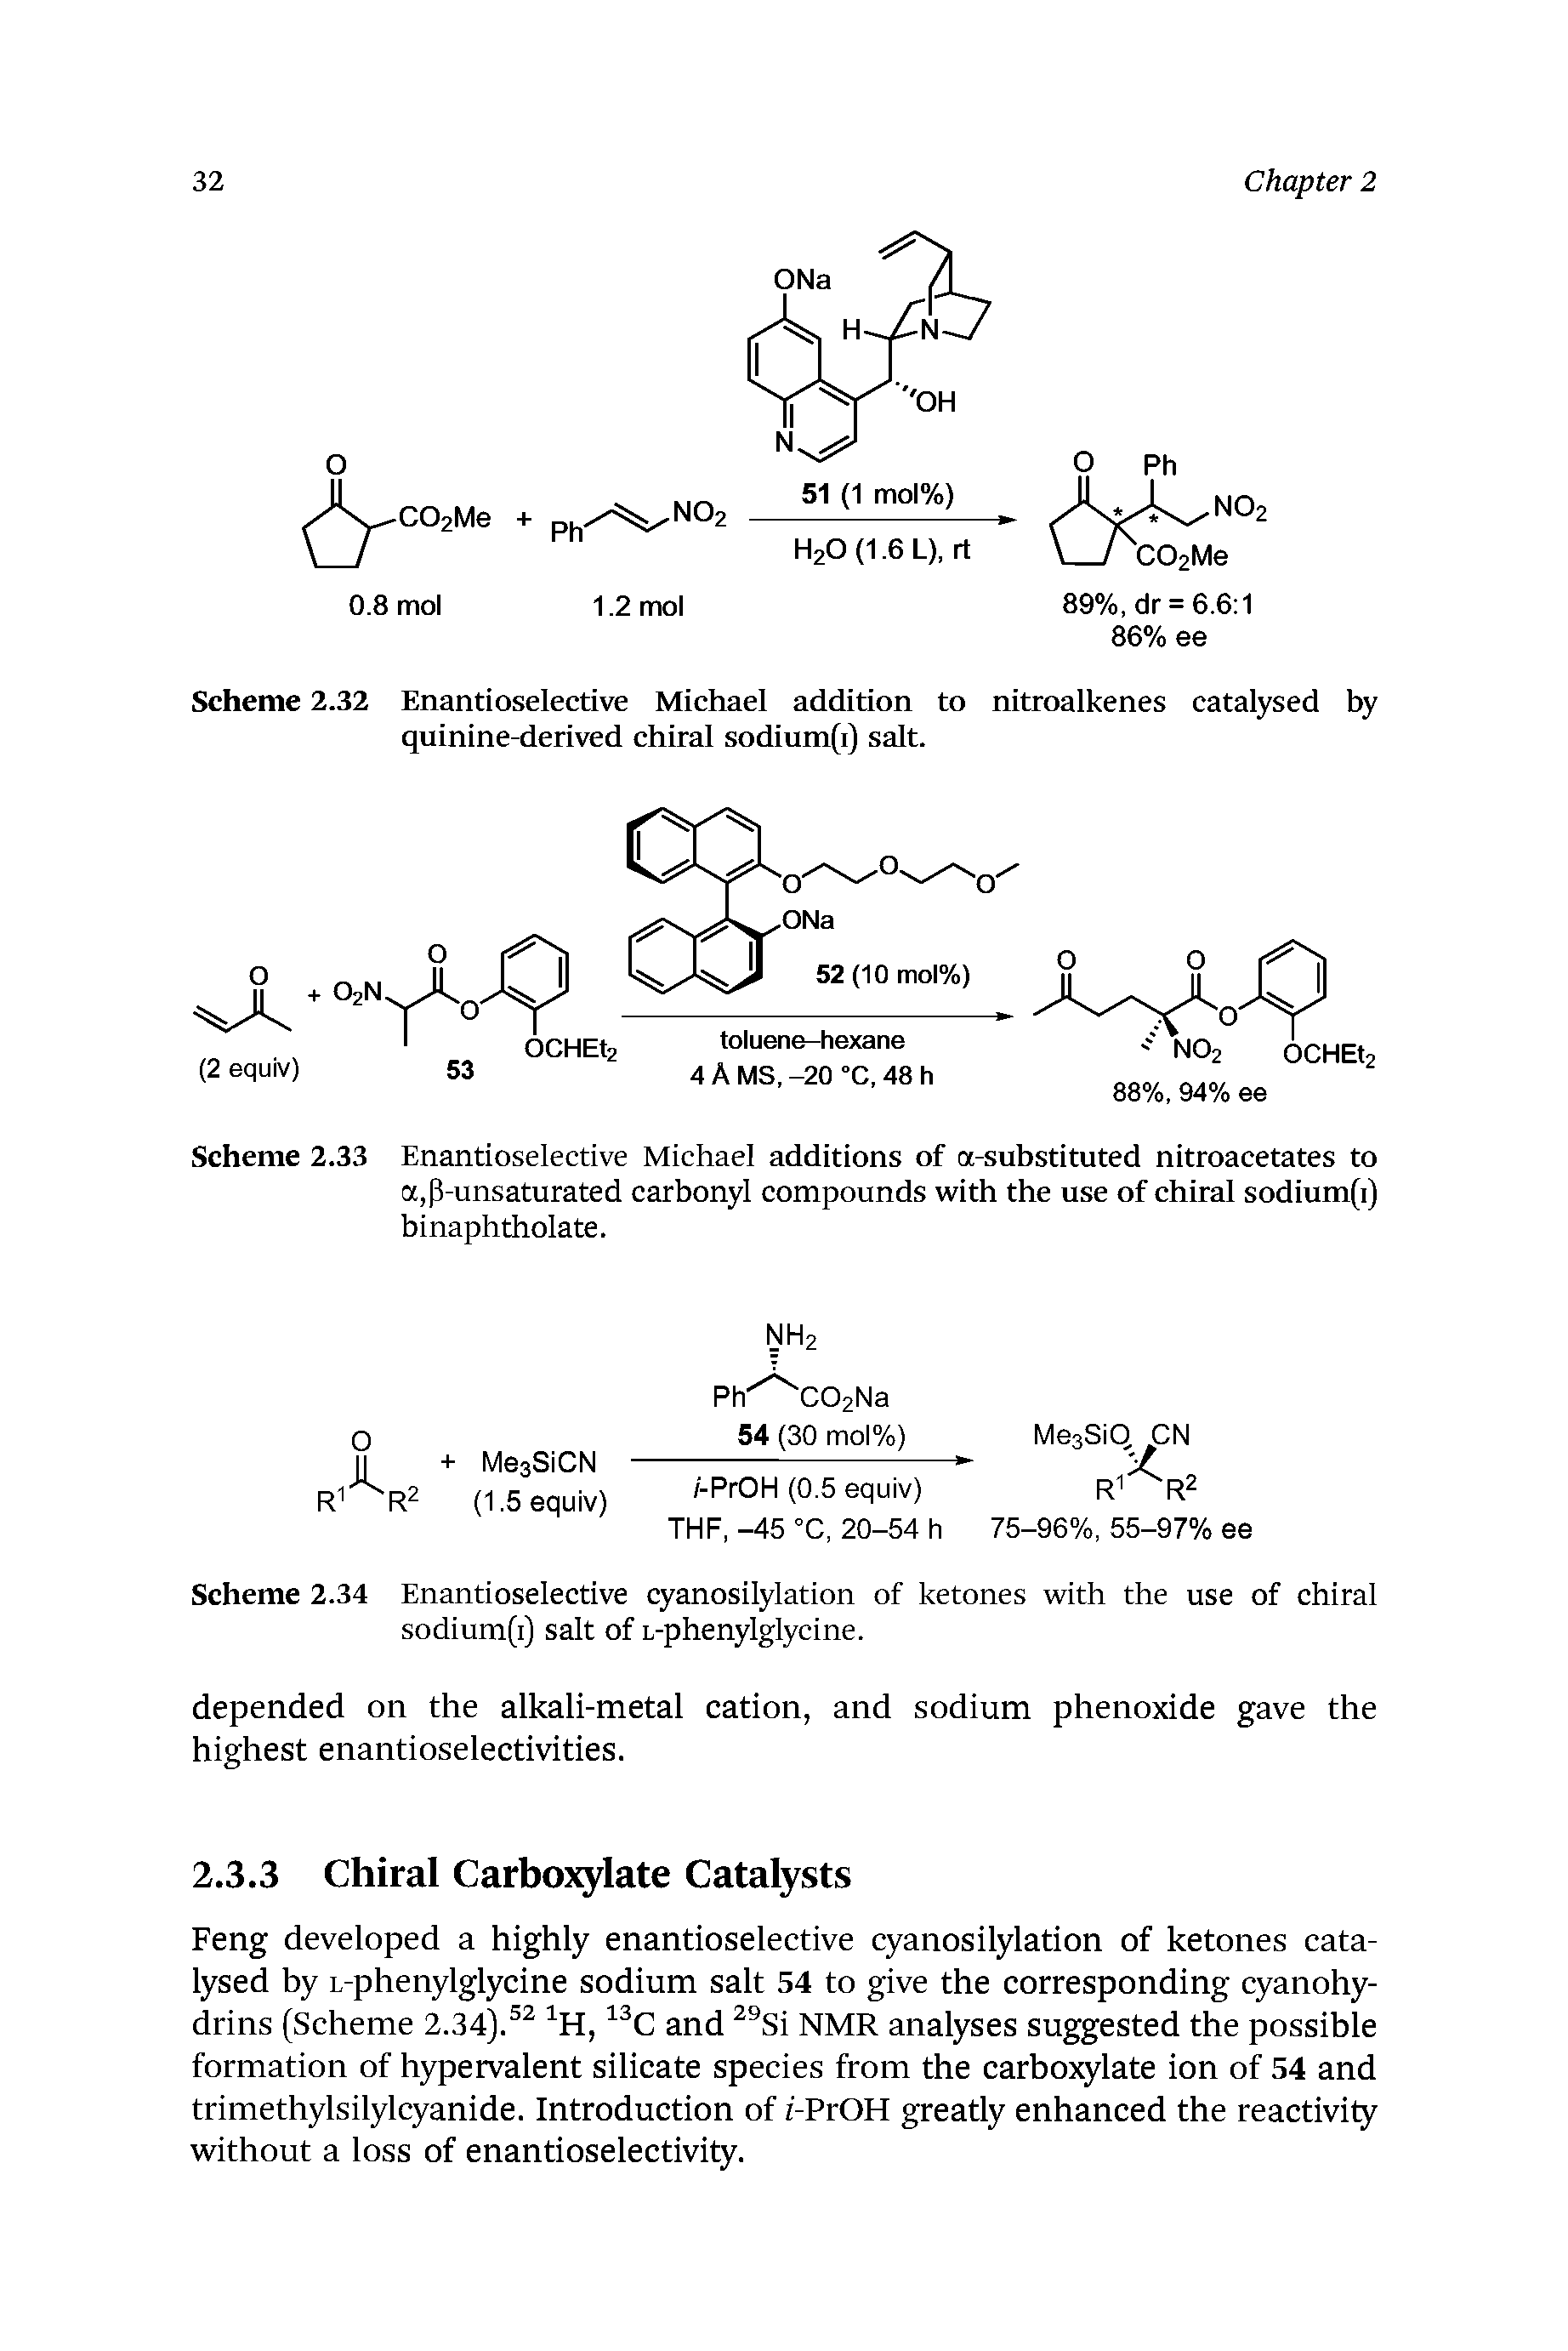 Scheme 2.33 Enantioselective Michael additions of a-substituted nitroacetates to a,P-unsaturated carbonyl compounds with the use of chiral sodium(i) binaphtholate.